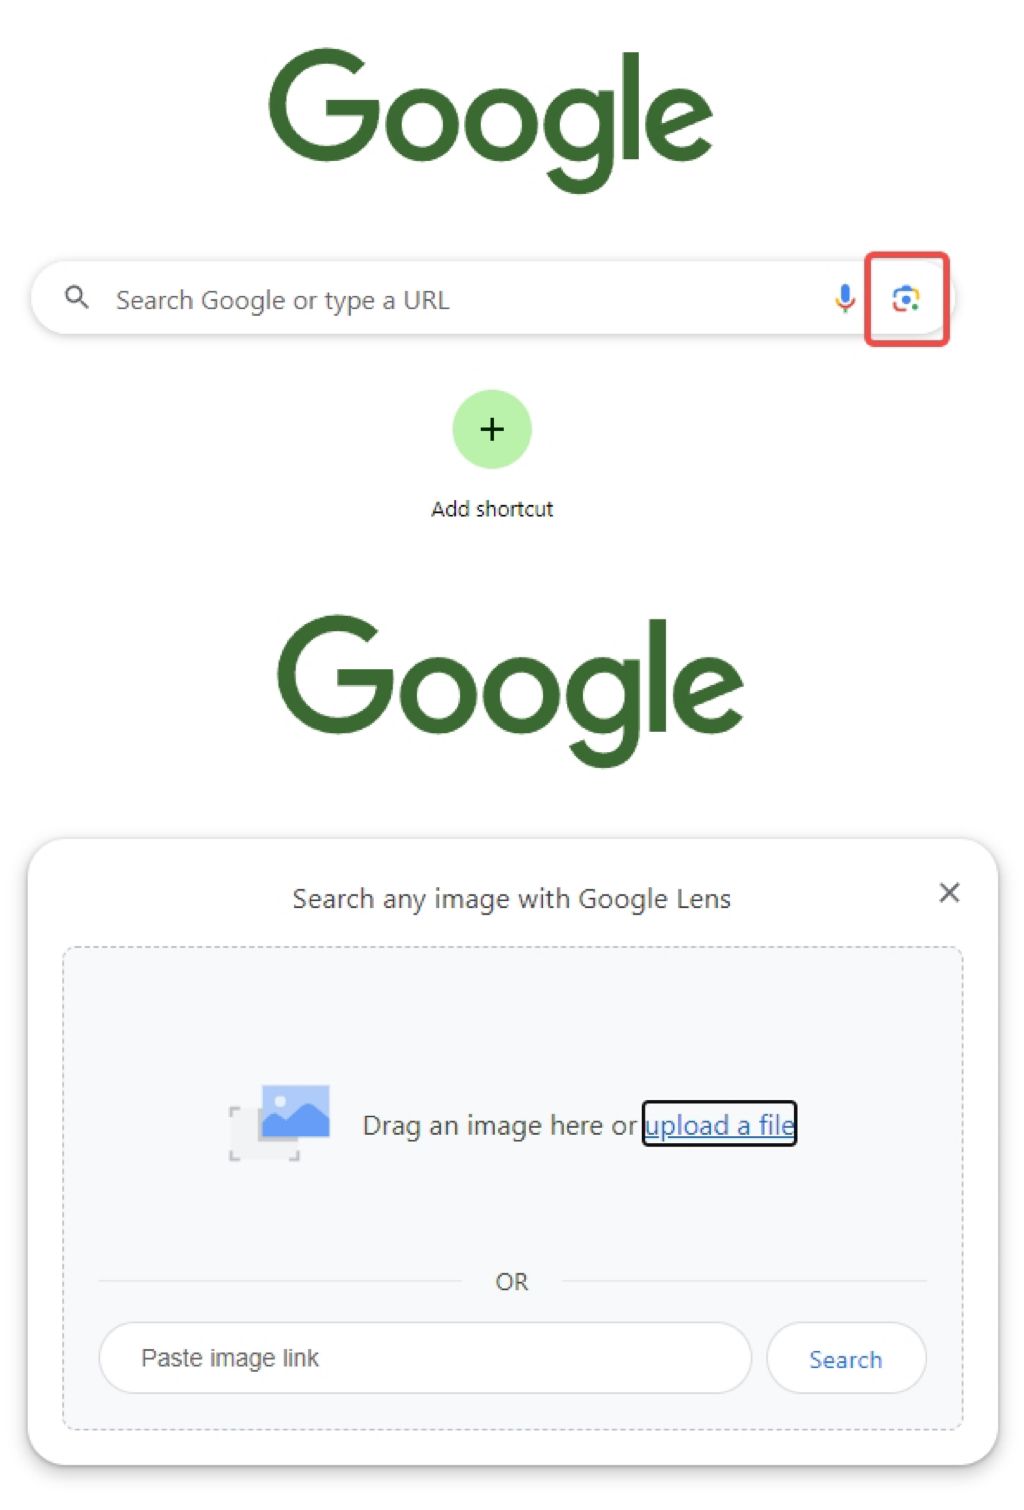 Steps of how to find images in Google search bar.